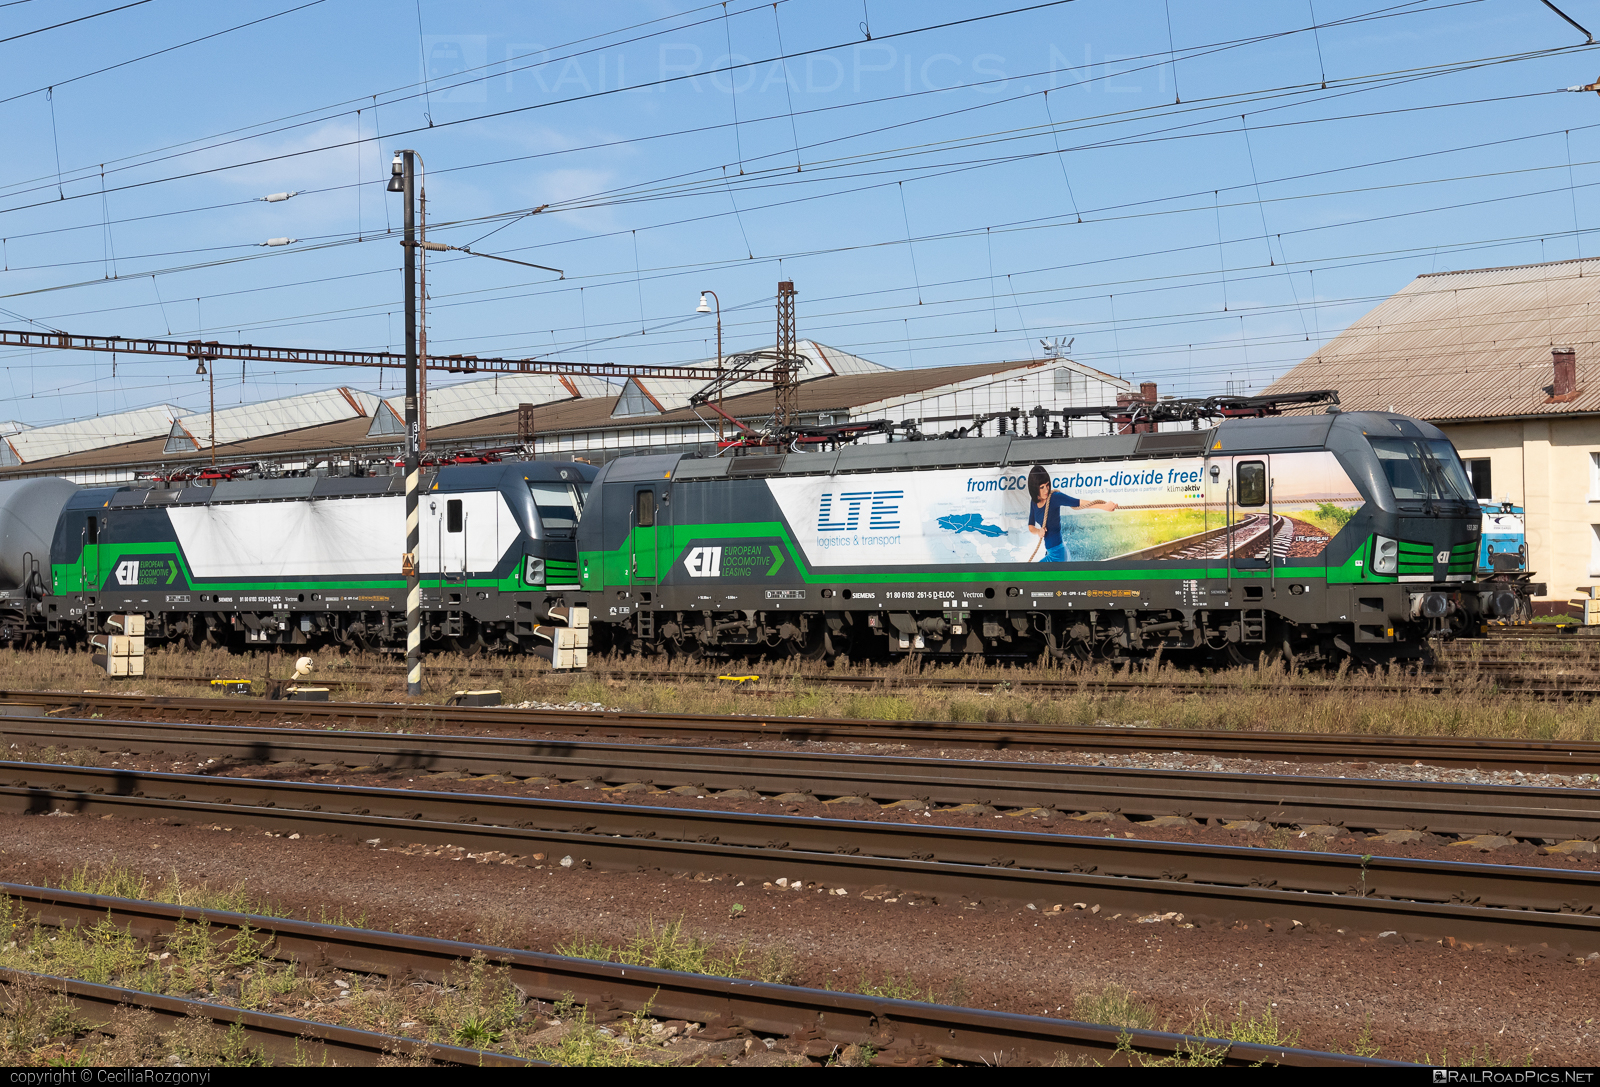 Siemens Vectron MS - 193 261 operated by LTE Logistik und Transport GmbH #ell #ellgermany #eloc #europeanlocomotiveleasing #lte #ltelogistikundtransport #ltelogistikundtransportgmbh #siemens #siemensVectron #siemensVectronMS #vectron #vectronMS